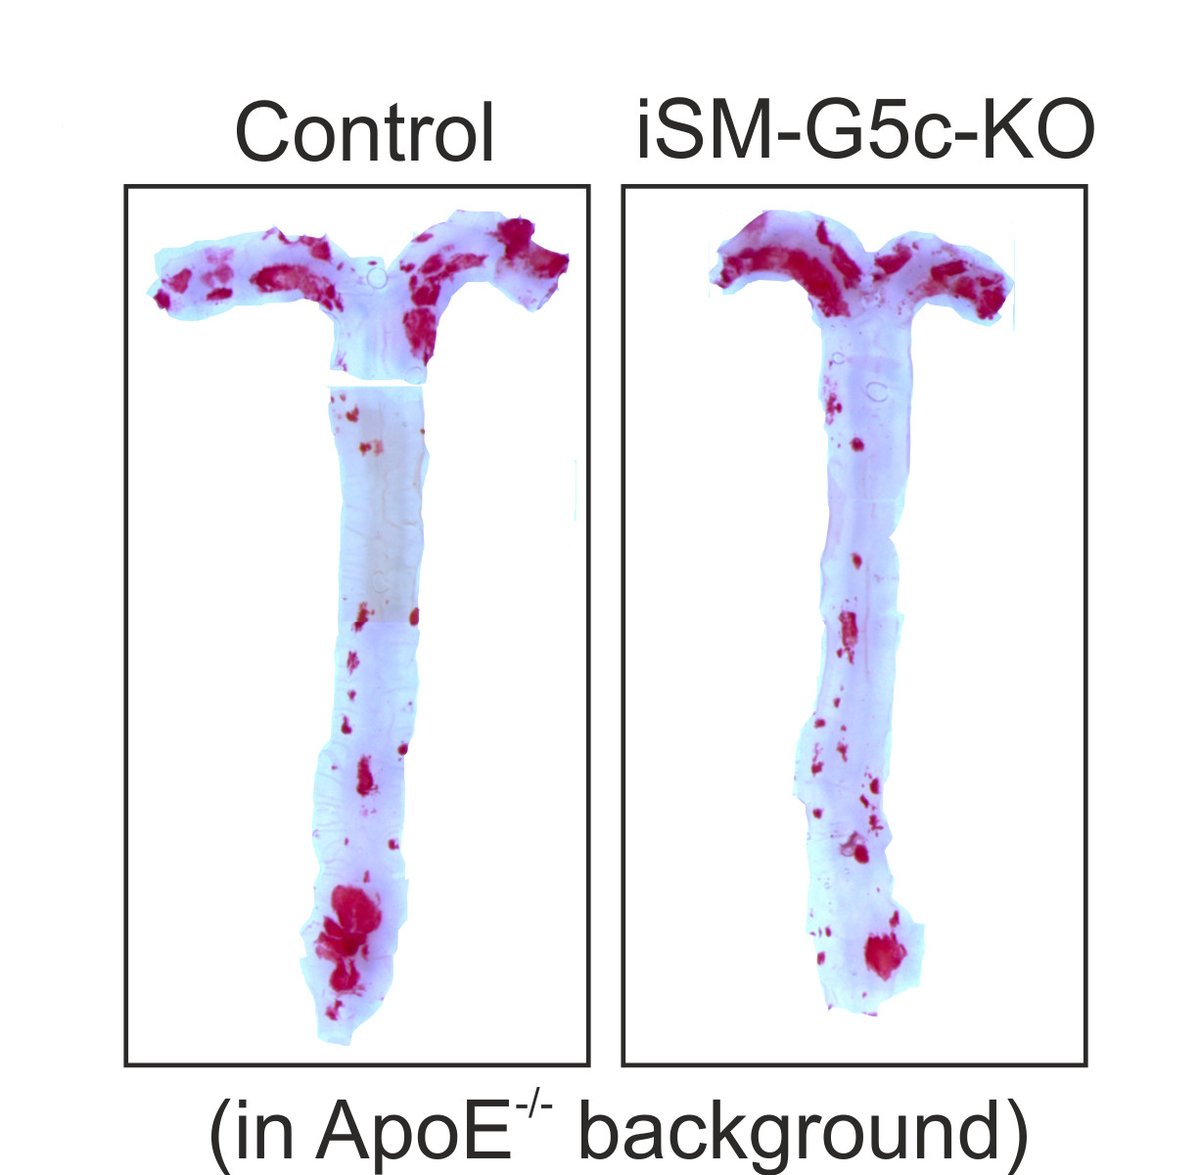 Wang & colleagues found that the orphan G-protein coupled receptor (GPCR) #GPCRC5C regulates #AngII dependent #vascular #contraction. Learn more at ahajrnls.org/4dGDlTv @Wang_T_P @shamitkr